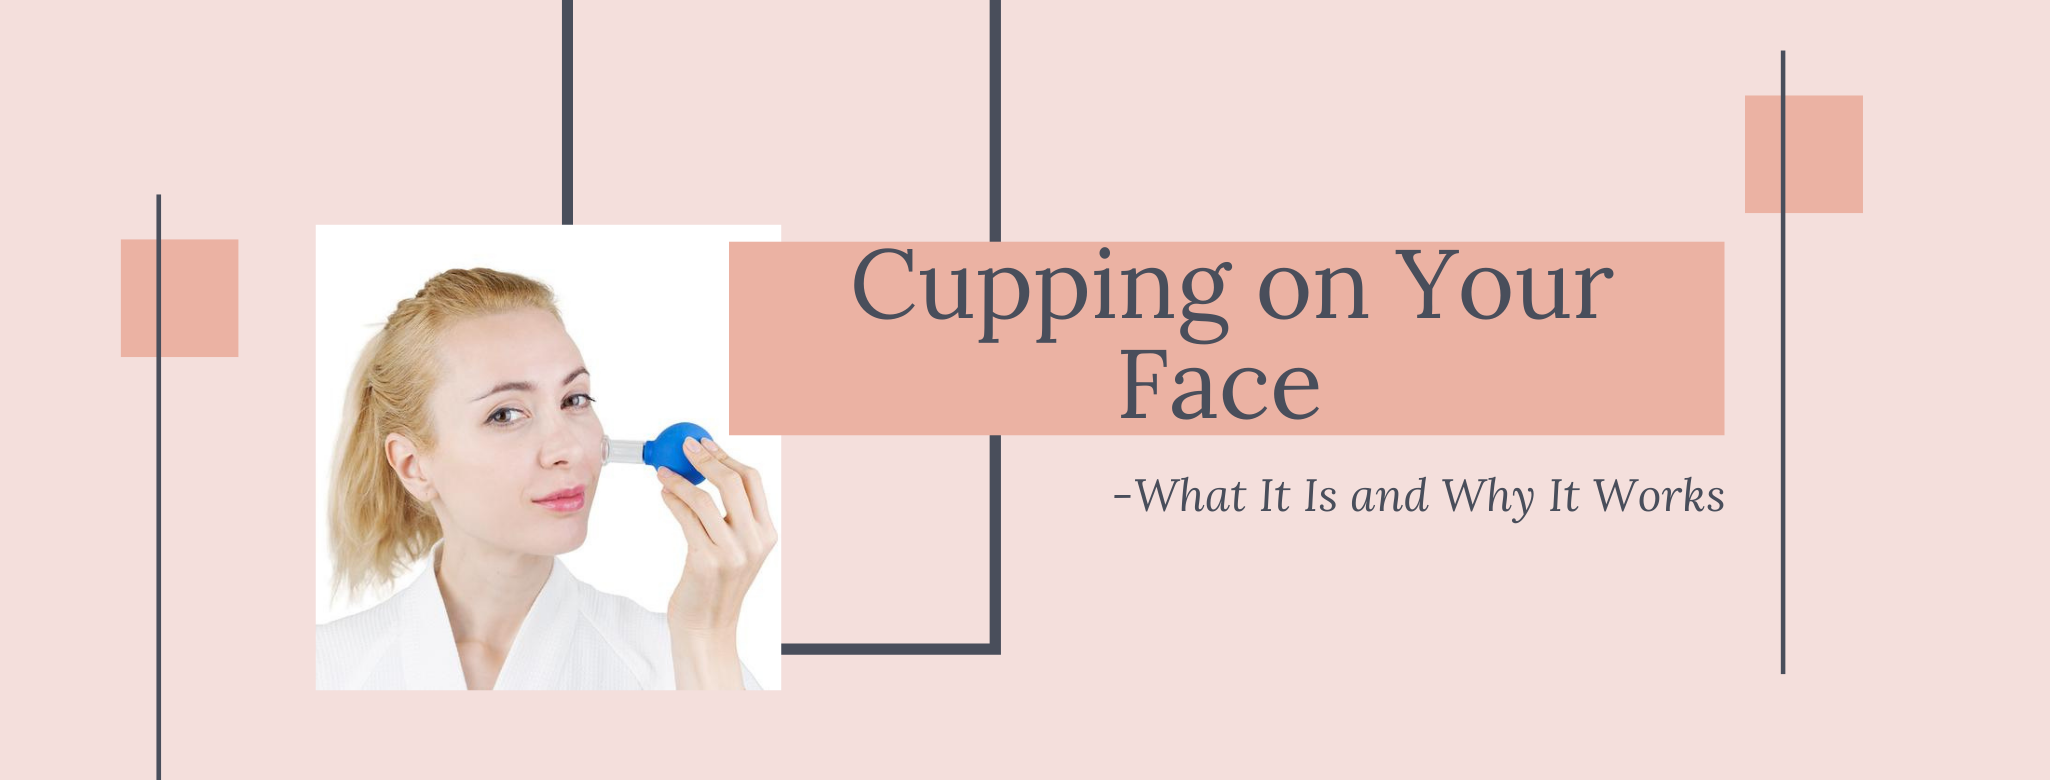 Cupping on Your Face – What It Is and Why It Works